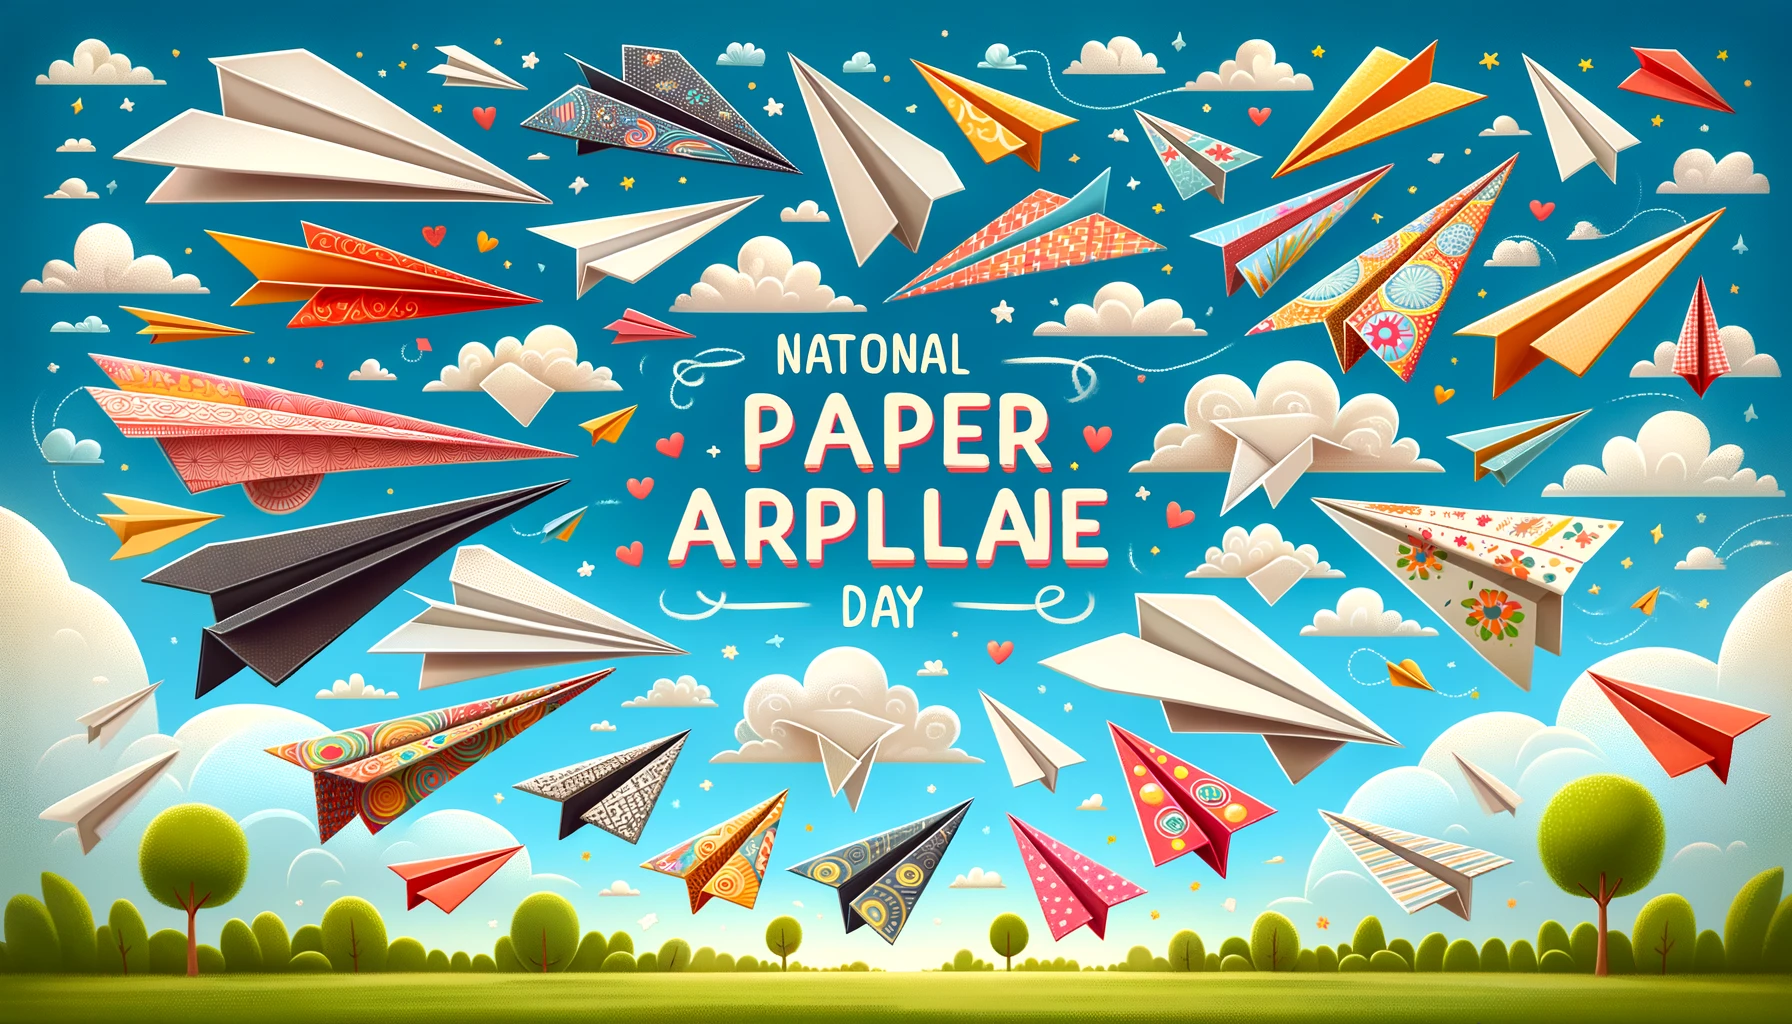 Creative Paper Airplane Day Greetings for Friends